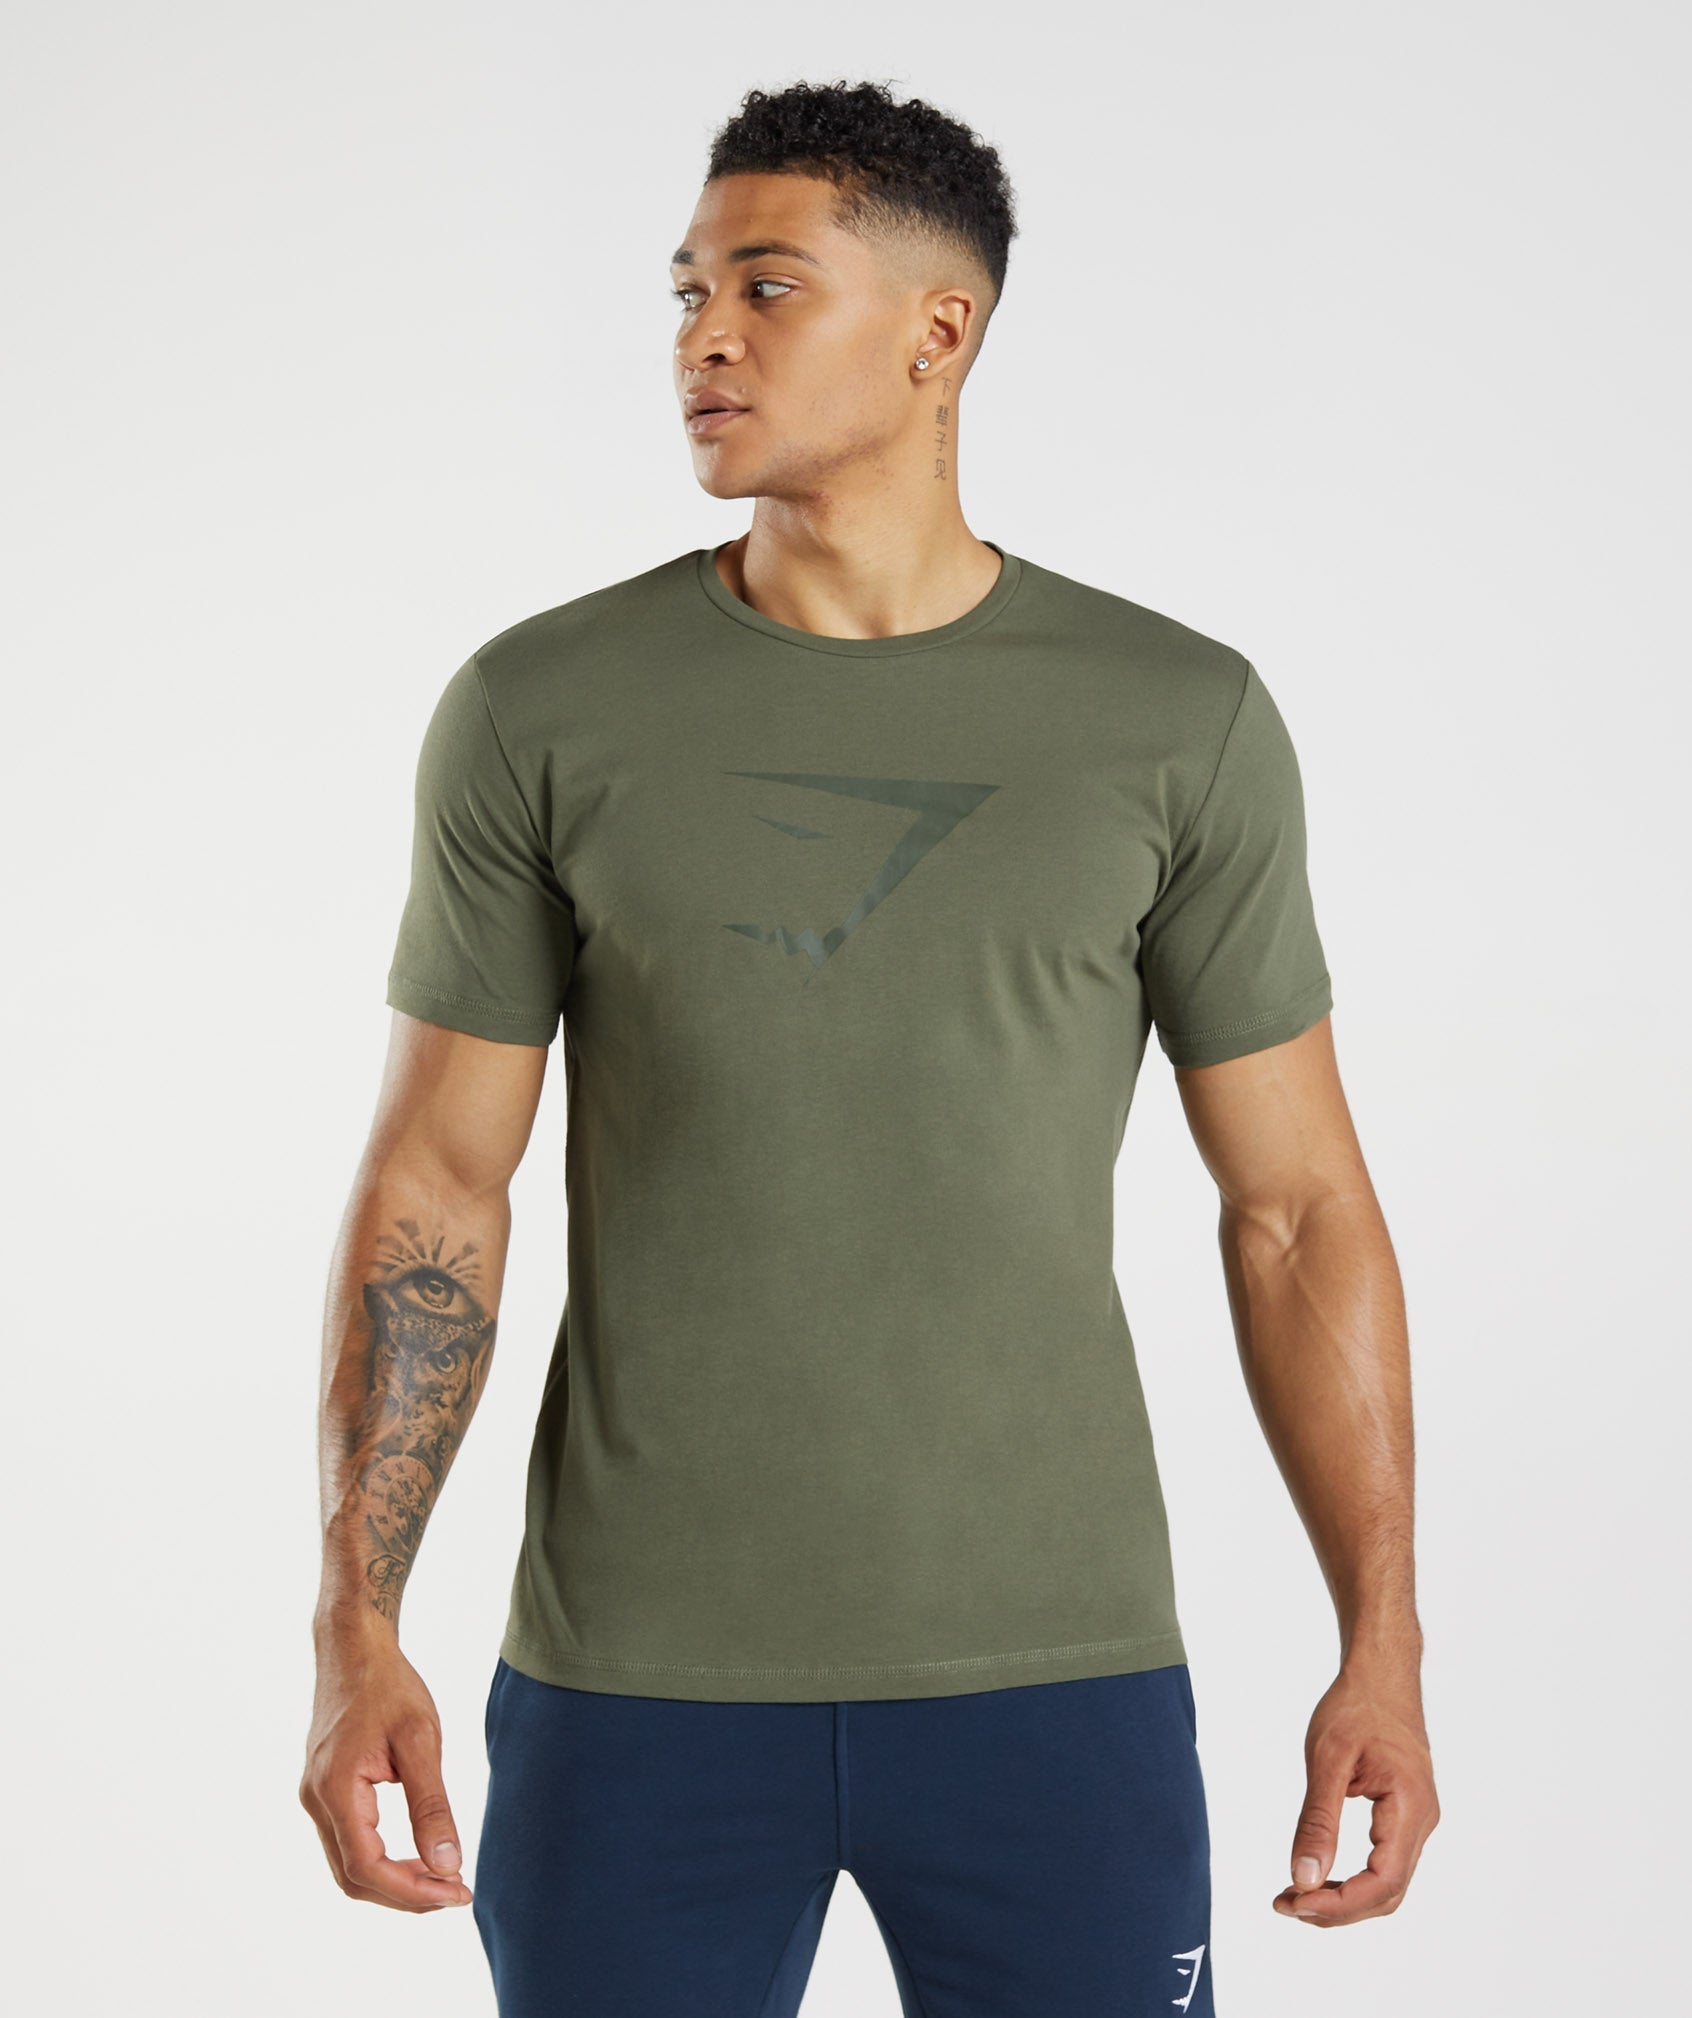 Sharkhead Infill T-Shirt in Core Olive - view 1